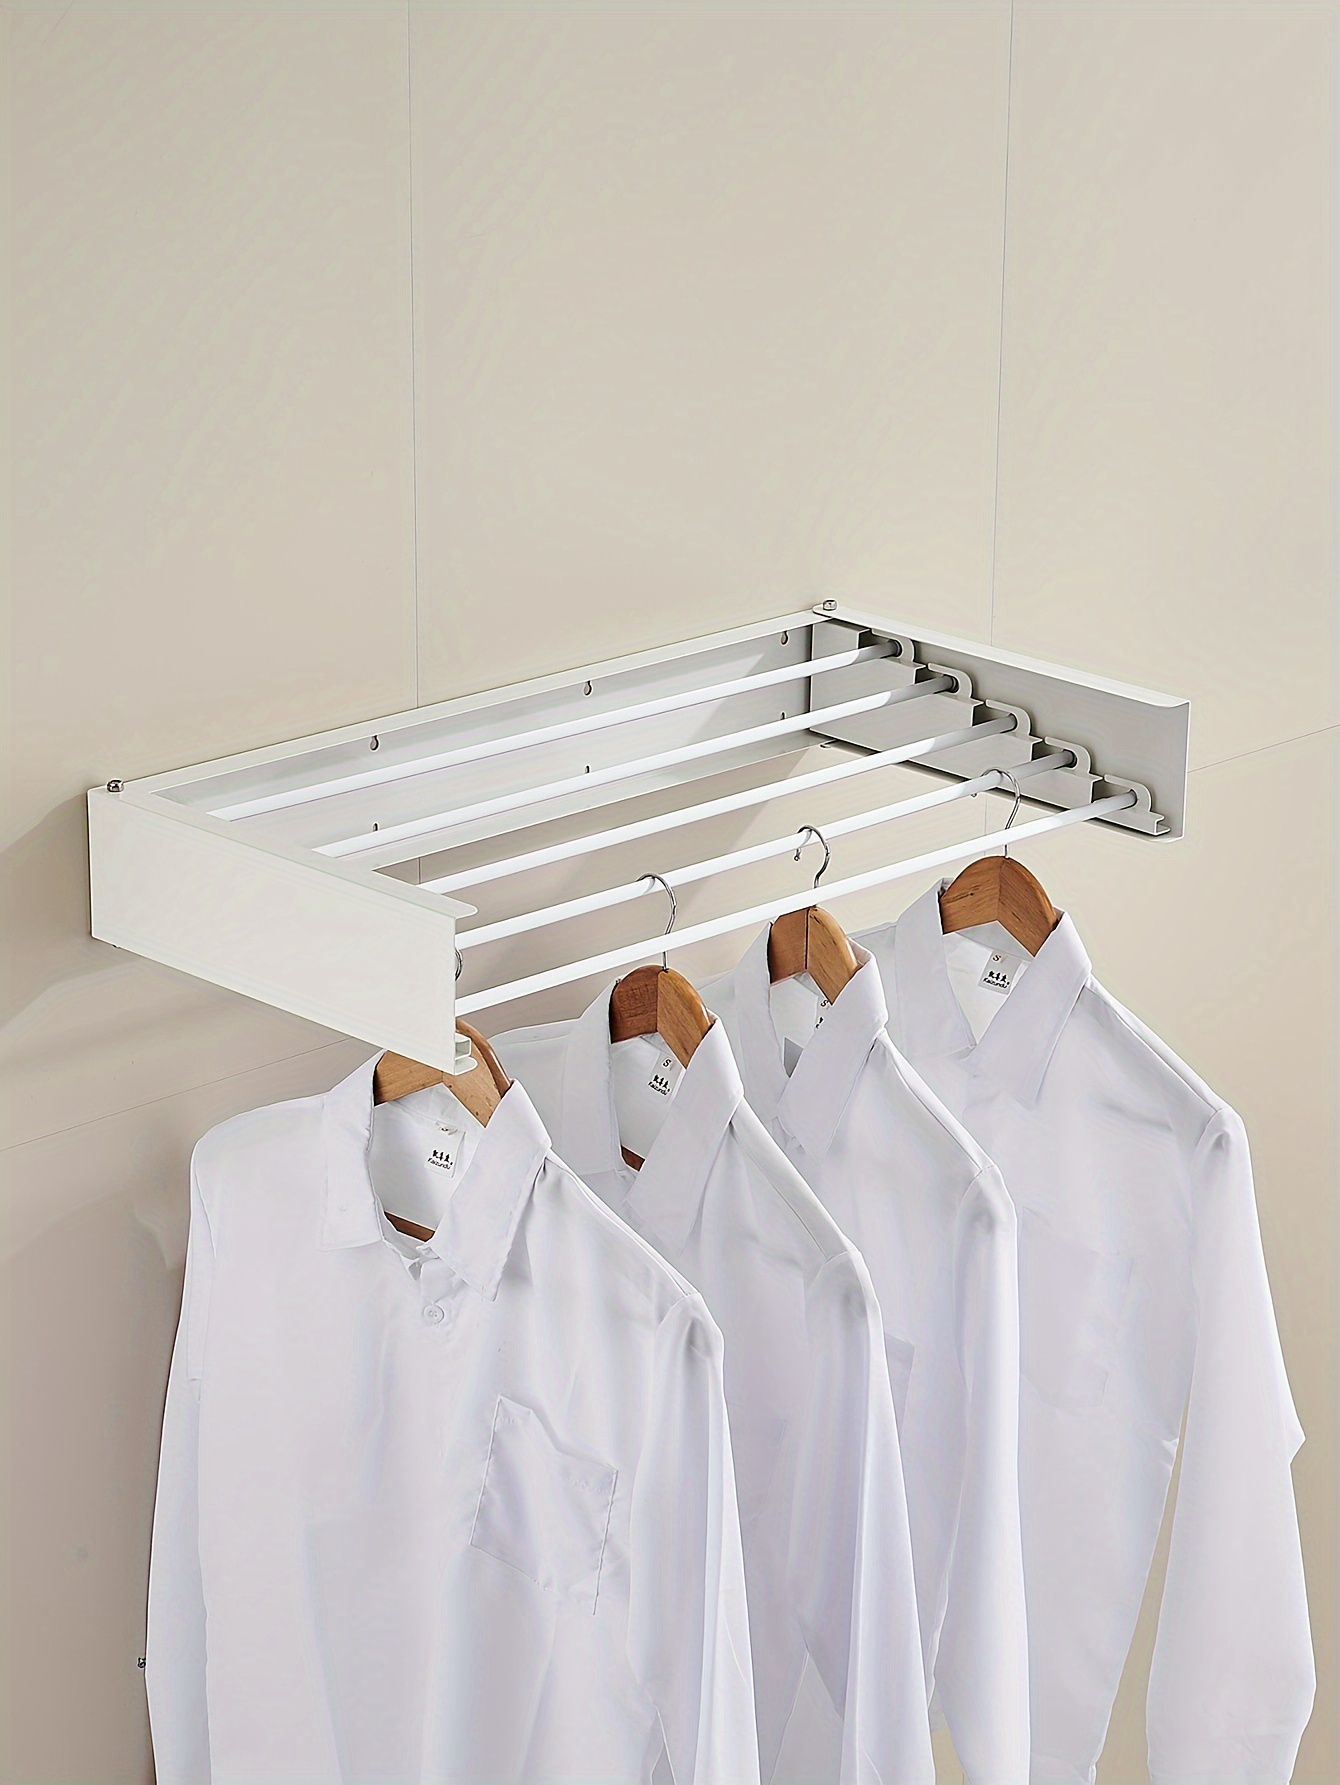  Clothes Drying Rack Wall Mounted, Laundry Drying Rack